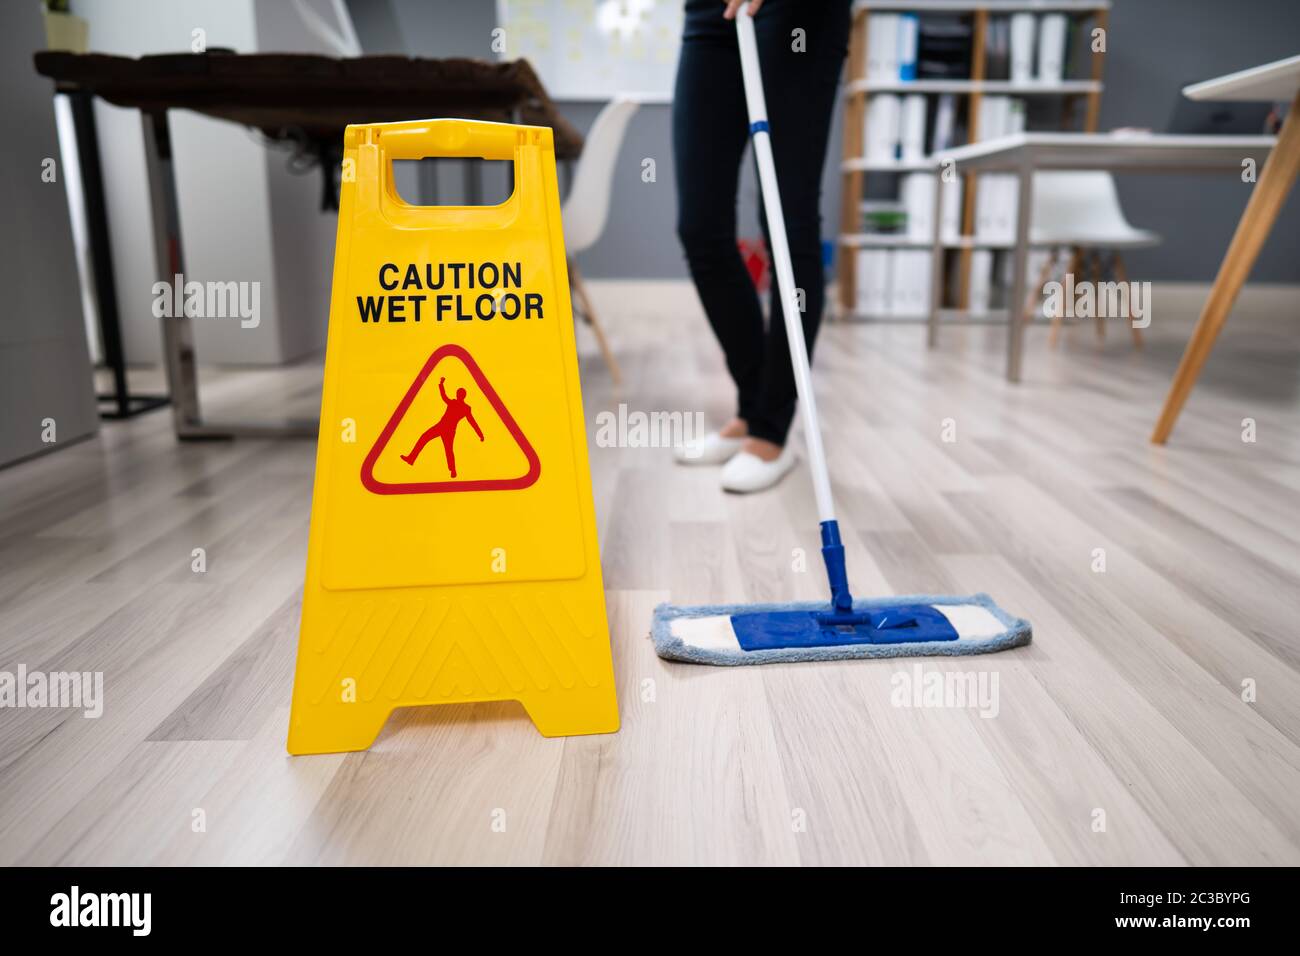 Female Janitor Mopping Floor In Modern Office Stock Photo